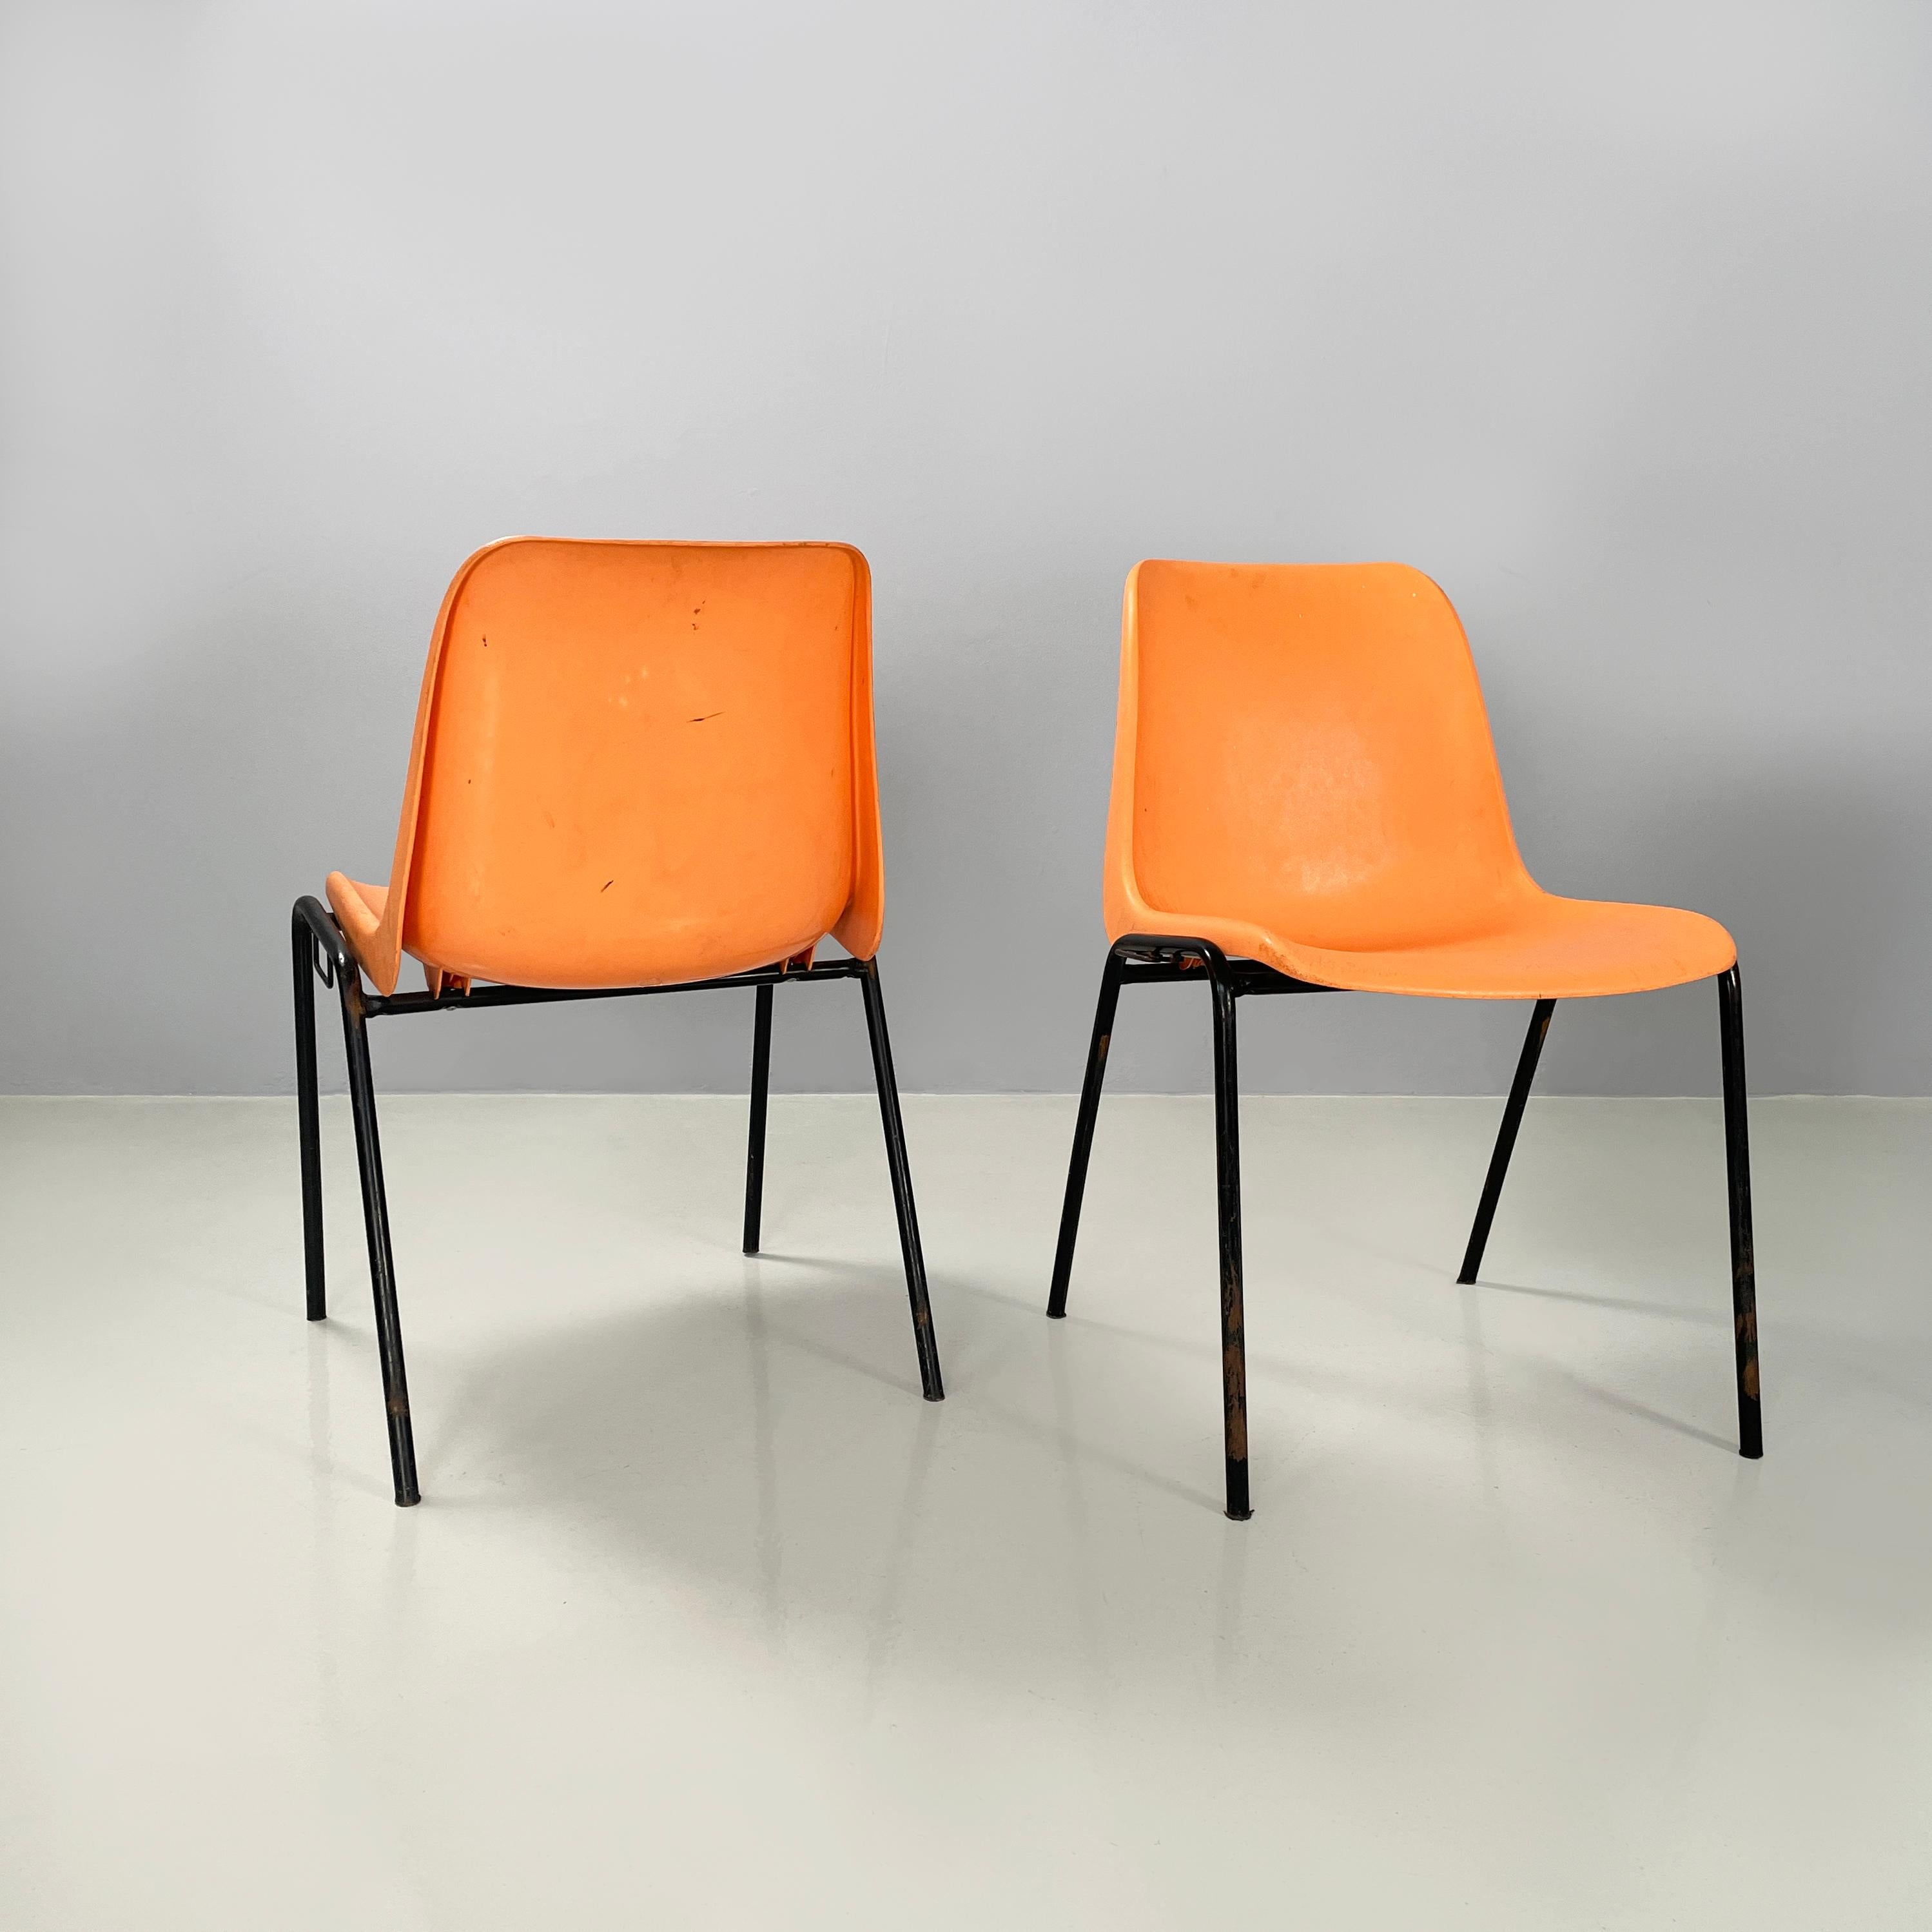 Italian modern Stackable chairs in orange plastic and black metal, 2001
Set of 3 chairs with curved monocoque in orange plastic. The legs are made of black painted metal rod. On the two sides there are black painted metal rod parts that allow the